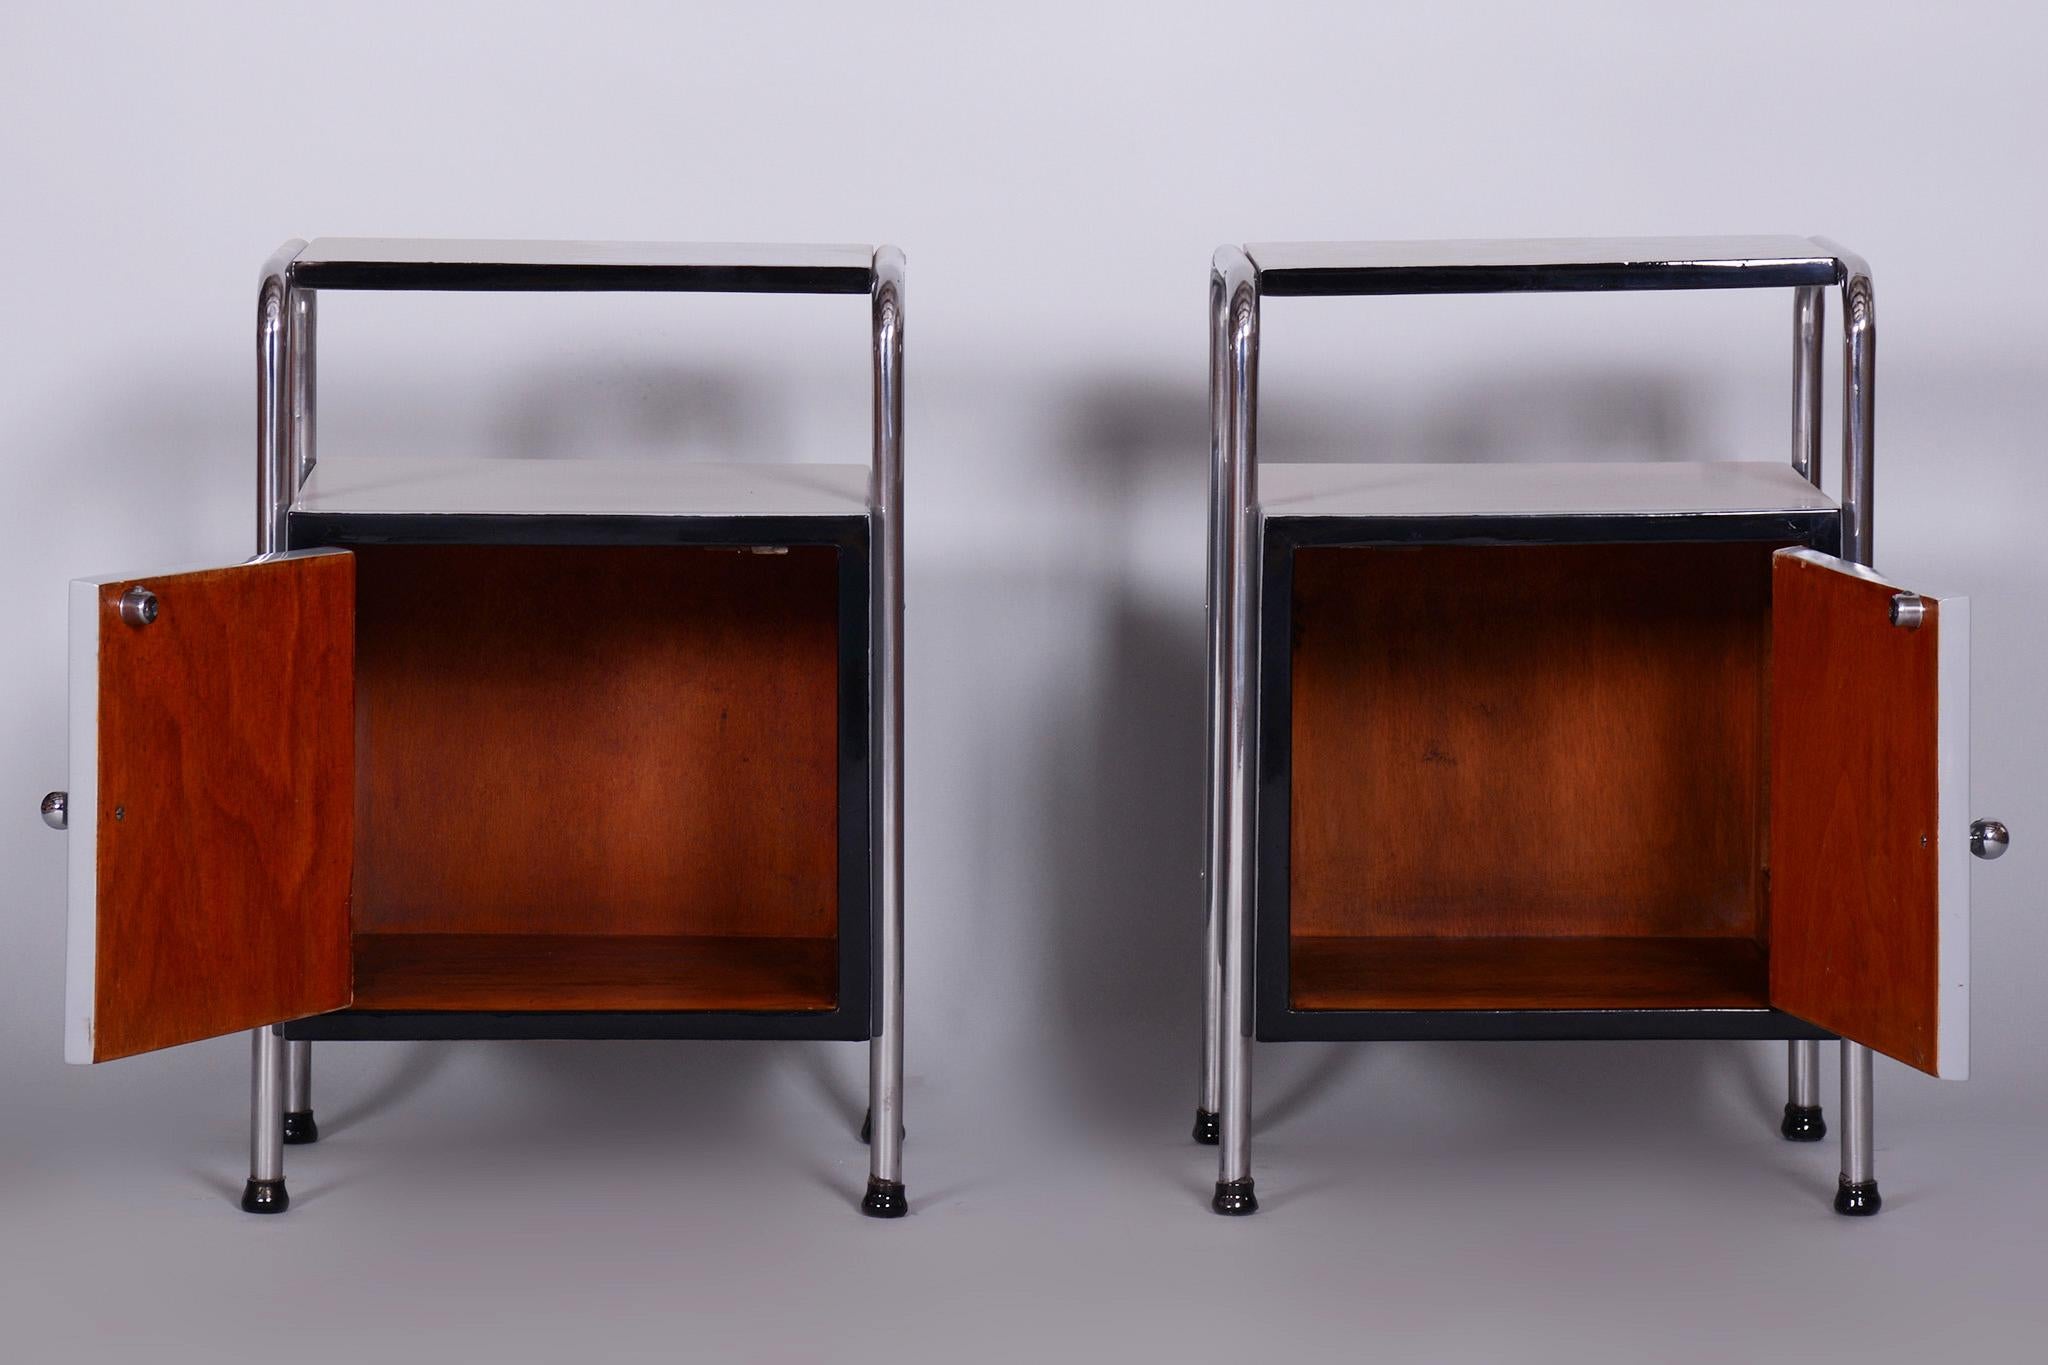 Restored Bed-Side Tables, Vichr a Spol, Chrome-Plated Steel, Czechia, 1930s For Sale 3